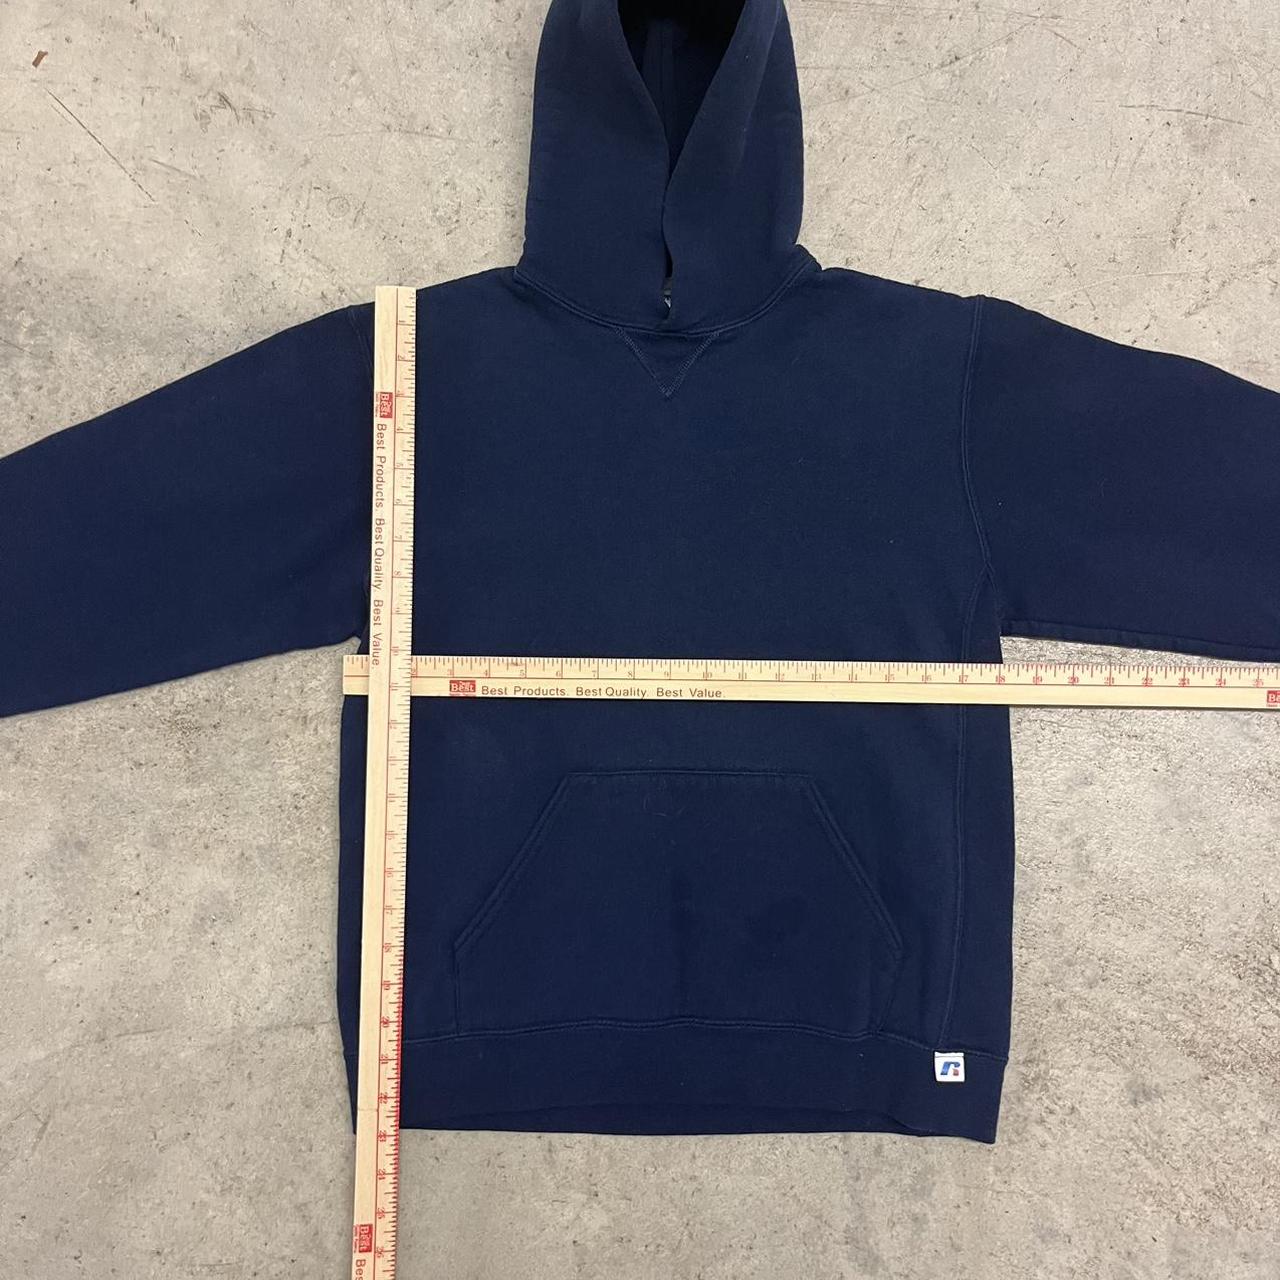 Russell Athletic Iconic hoodie in navy